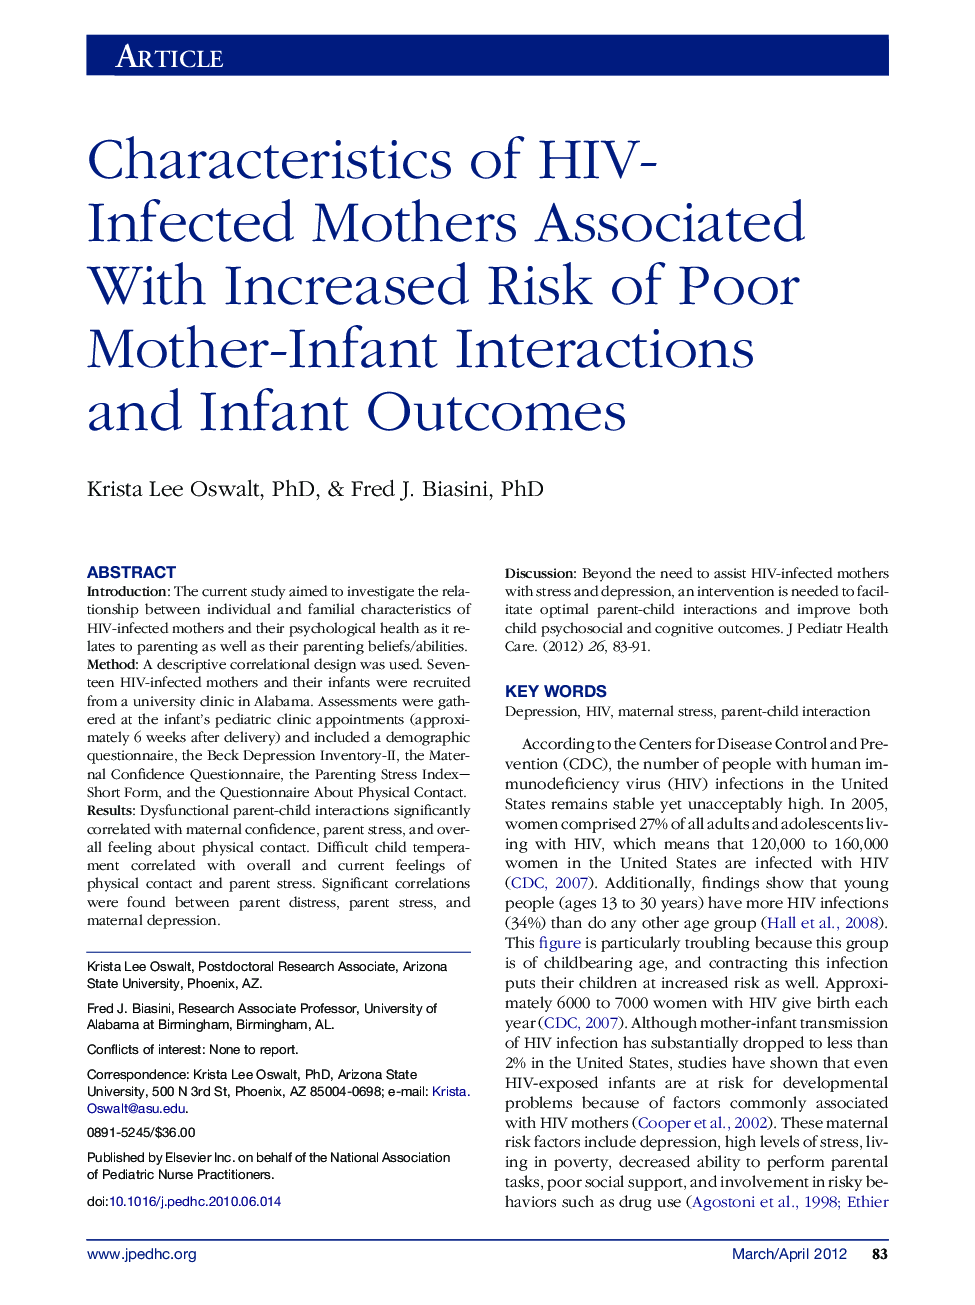 Characteristics of HIV-Infected Mothers Associated With Increased Risk of Poor Mother-Infant Interactions and Infant Outcomes 